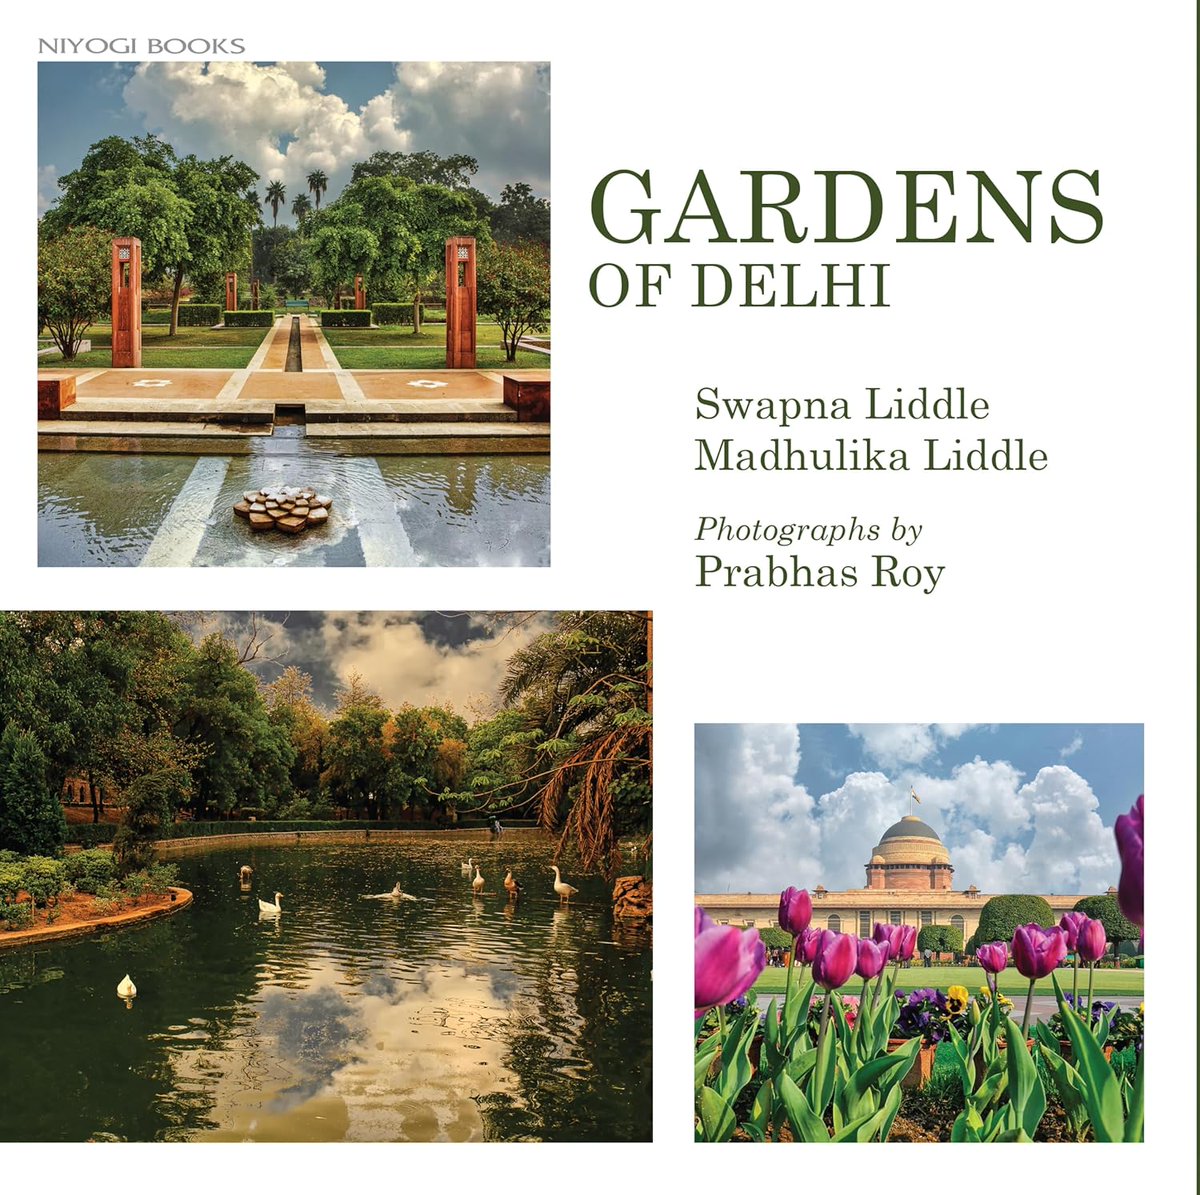 Amazing book on the historical gardens of Delhi by Swapna Liddle and @authormadhulika The pictures by Prabhas Roy are very nice. The history of the gardens along with the history, geography, and the detailed description of the trees make the book so special.